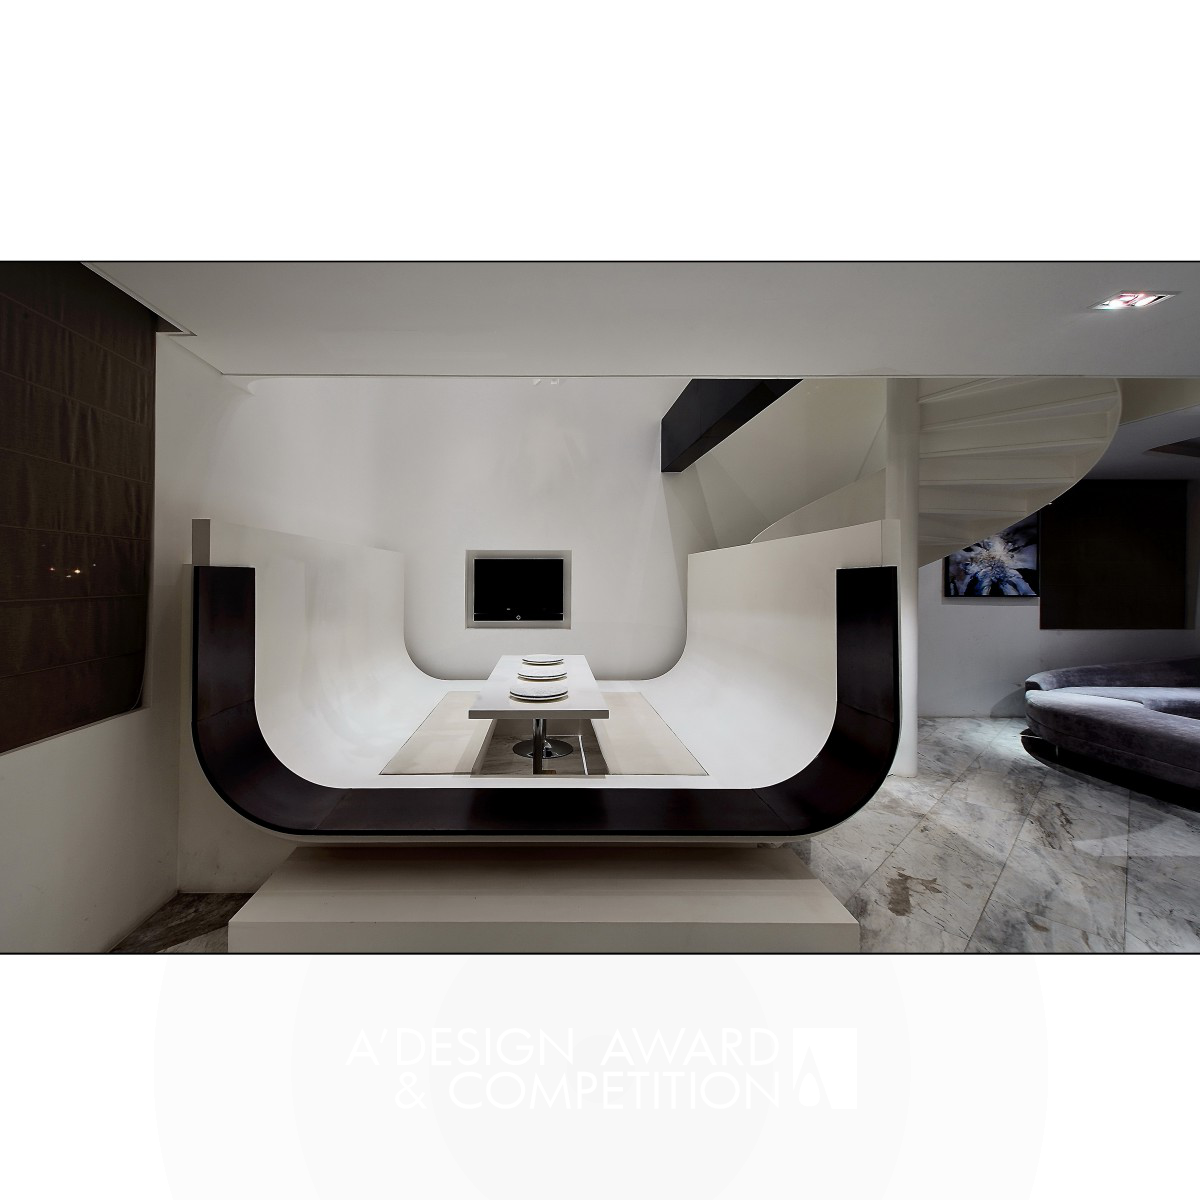 CURVE Residence by Kris Lin Platinum Interior Space and Exhibition Design Award Winner 2013 